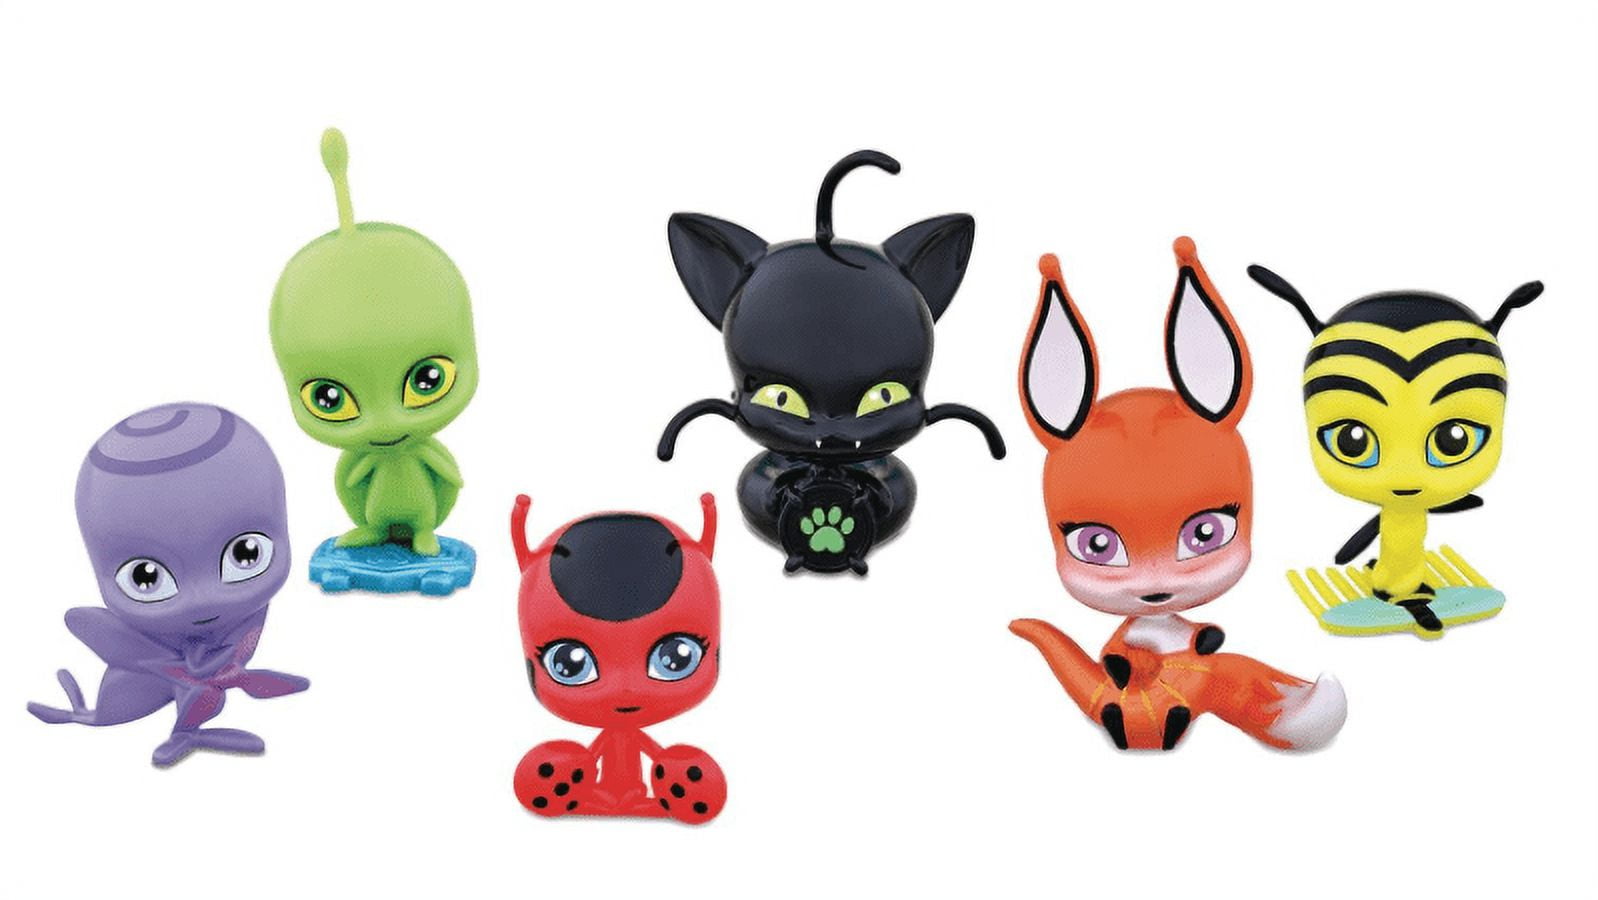 Miraculous Miracle Box Kwami Surprise - Blind Box - One of 6 Characters  (Wayzz, Tikki, Trixx, Plagg, Pollen, Nooroo) - Which Kwami Power Will you